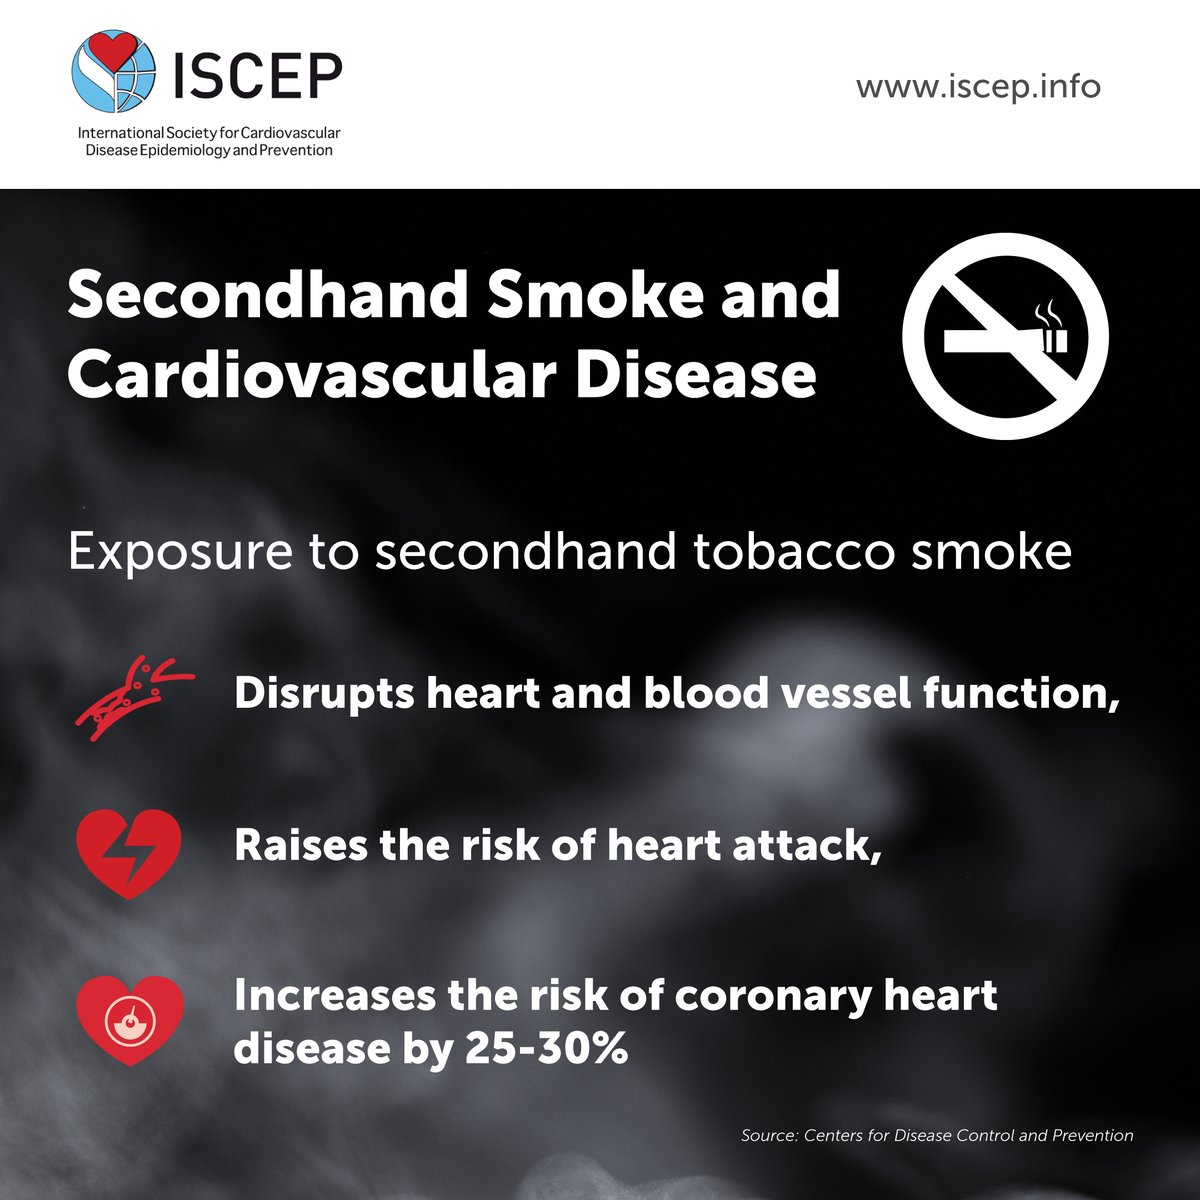 Exposure to secondhand smoke (SHS) is associated with an increased risk of coronary heart disease (CHD) among nonsmokers.

For more details, visit: iscep.info
#cardiovascular #secondhandsmoke #cardiohealth